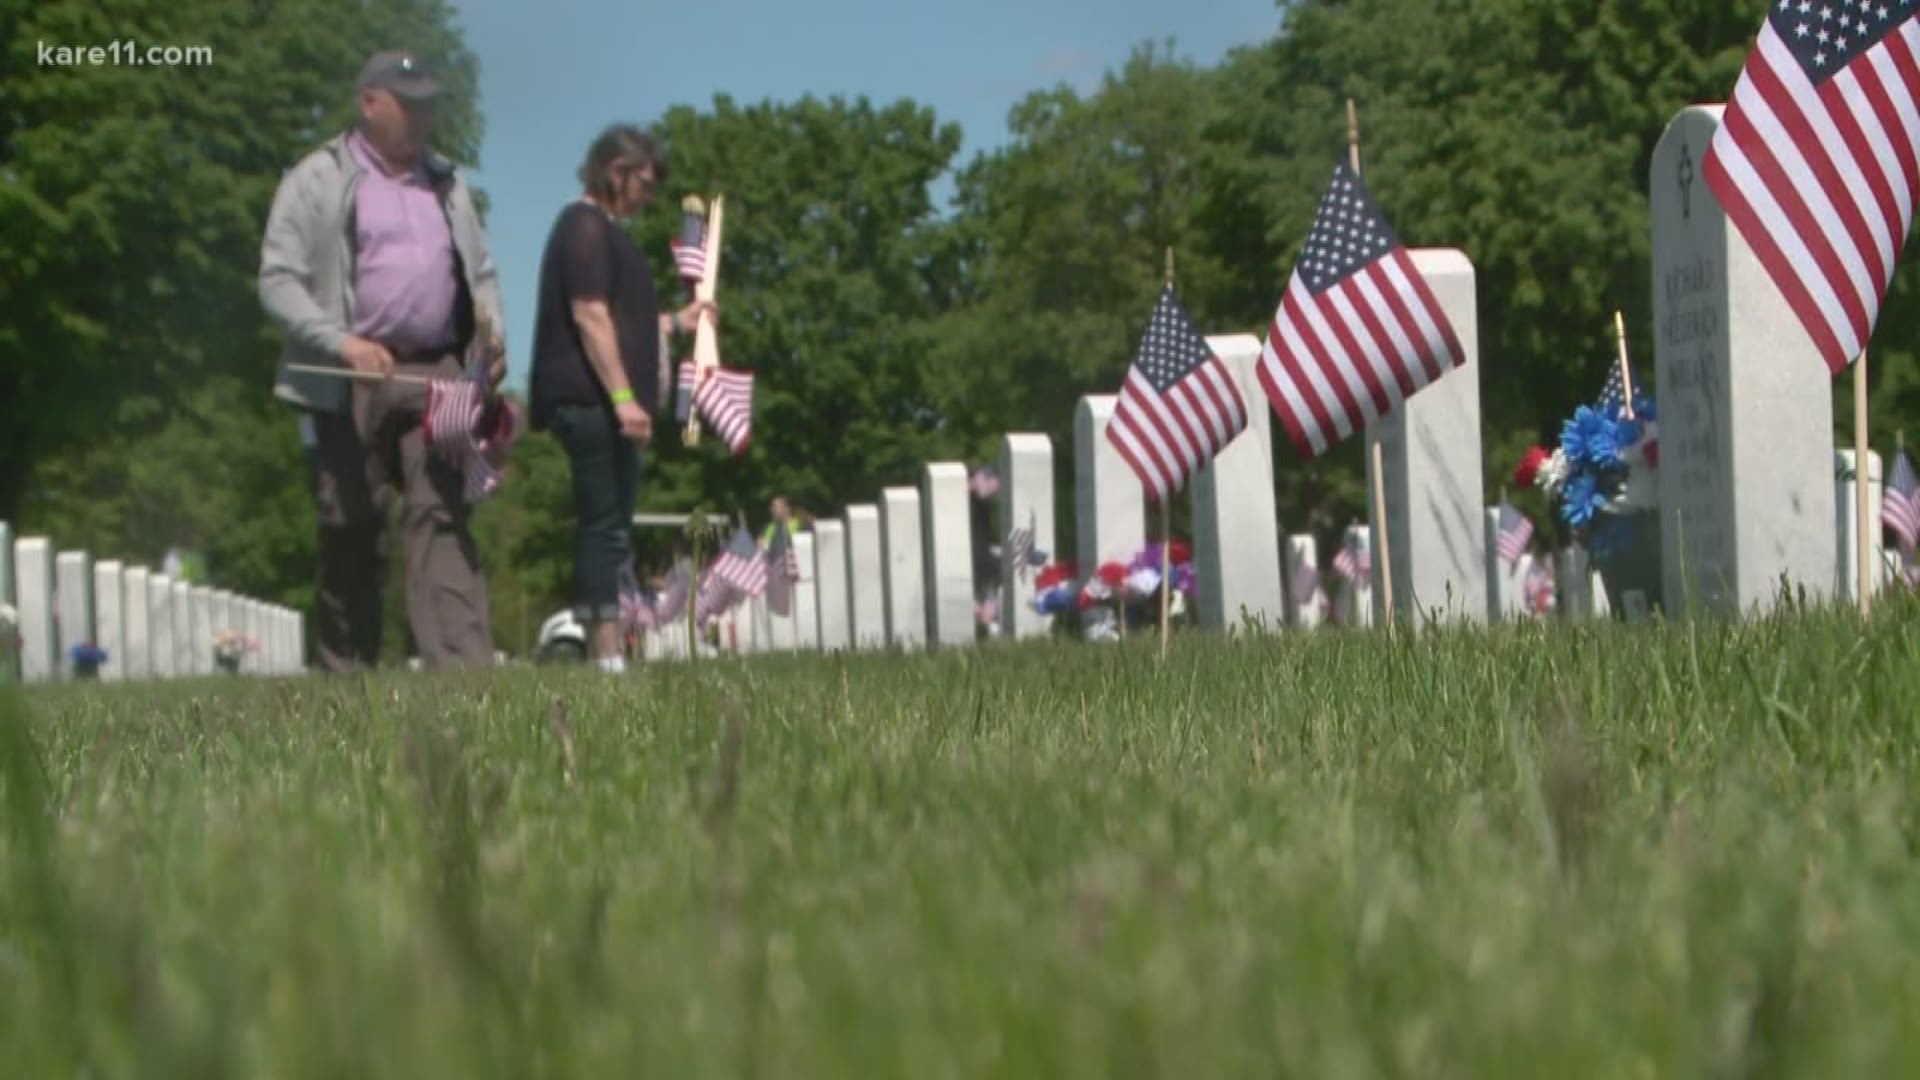 Flags for Fort Snelling began May of 2015 when Minnesotans noticed three decades had gone by since American flags had been placed at the memorial.